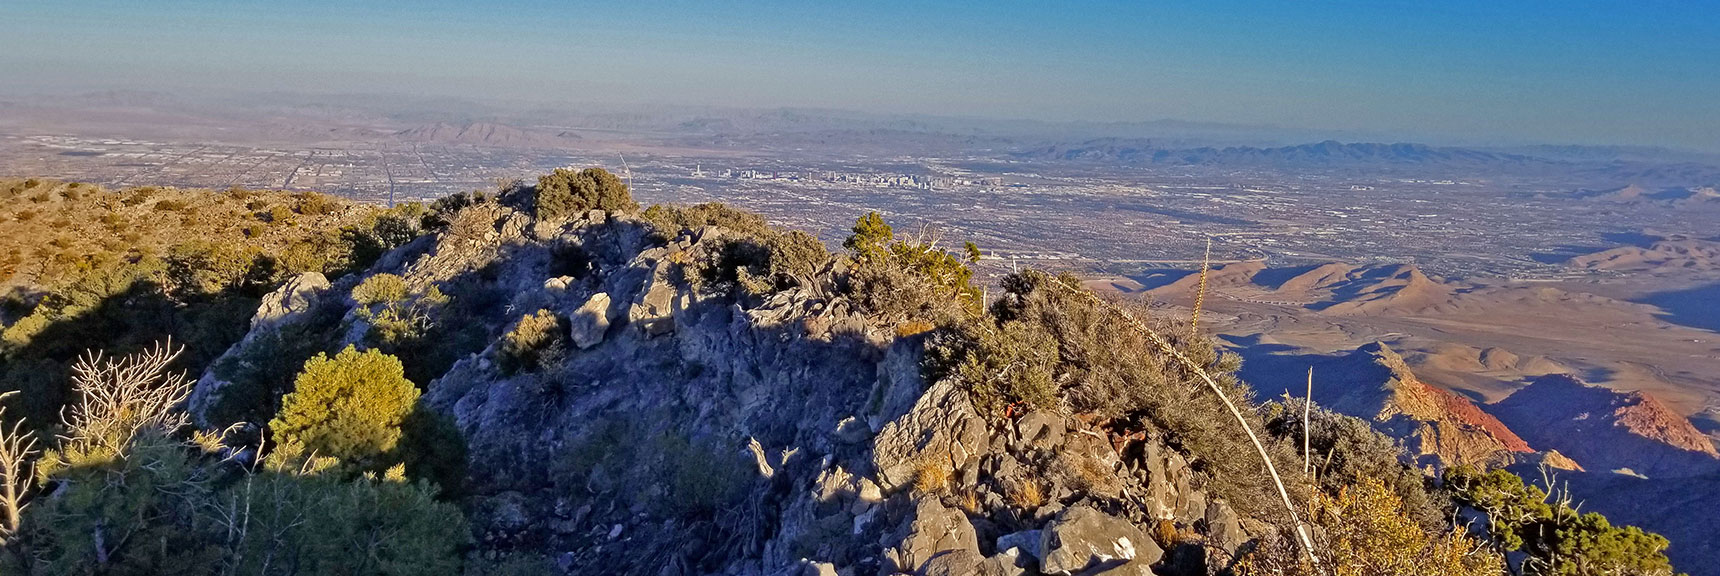 Southern Las Vegas Valley and Vegas Strip from El Padre Mt Summit | La Madre Mountain,, El Padre Mountain, Burnt Peak | La Madre Mountains Wilderness, Nevada